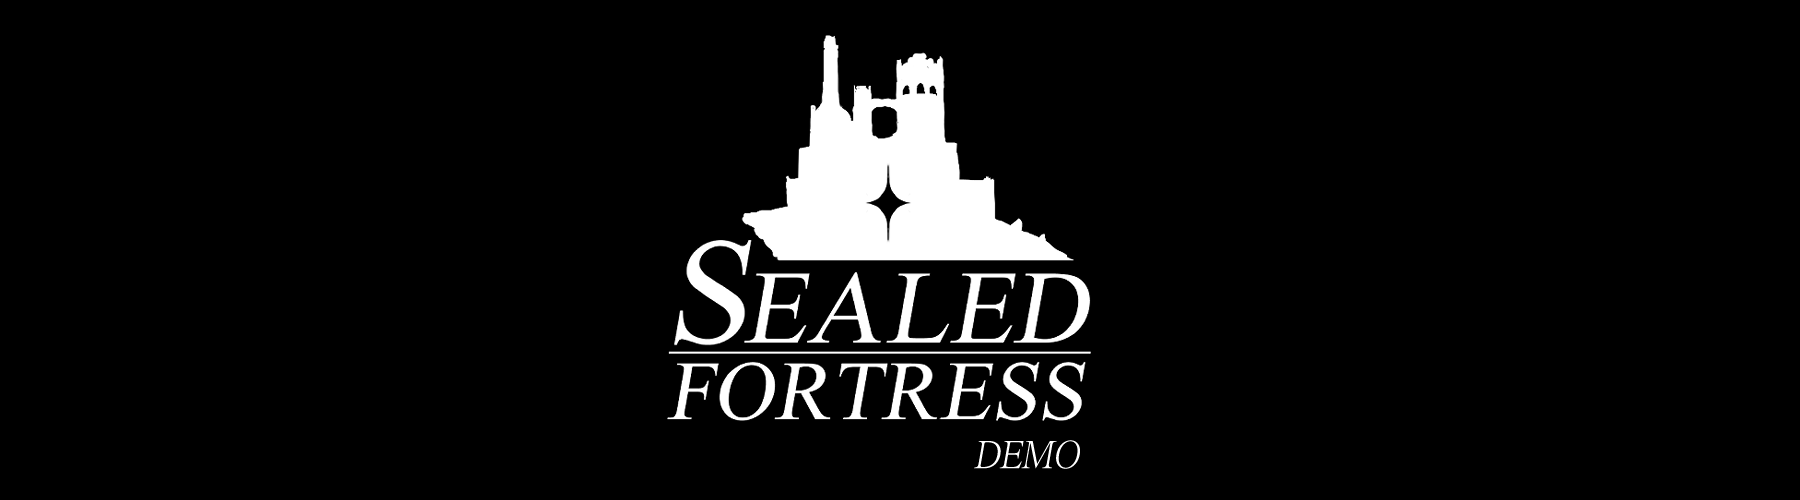 Sealed Fortress Demo